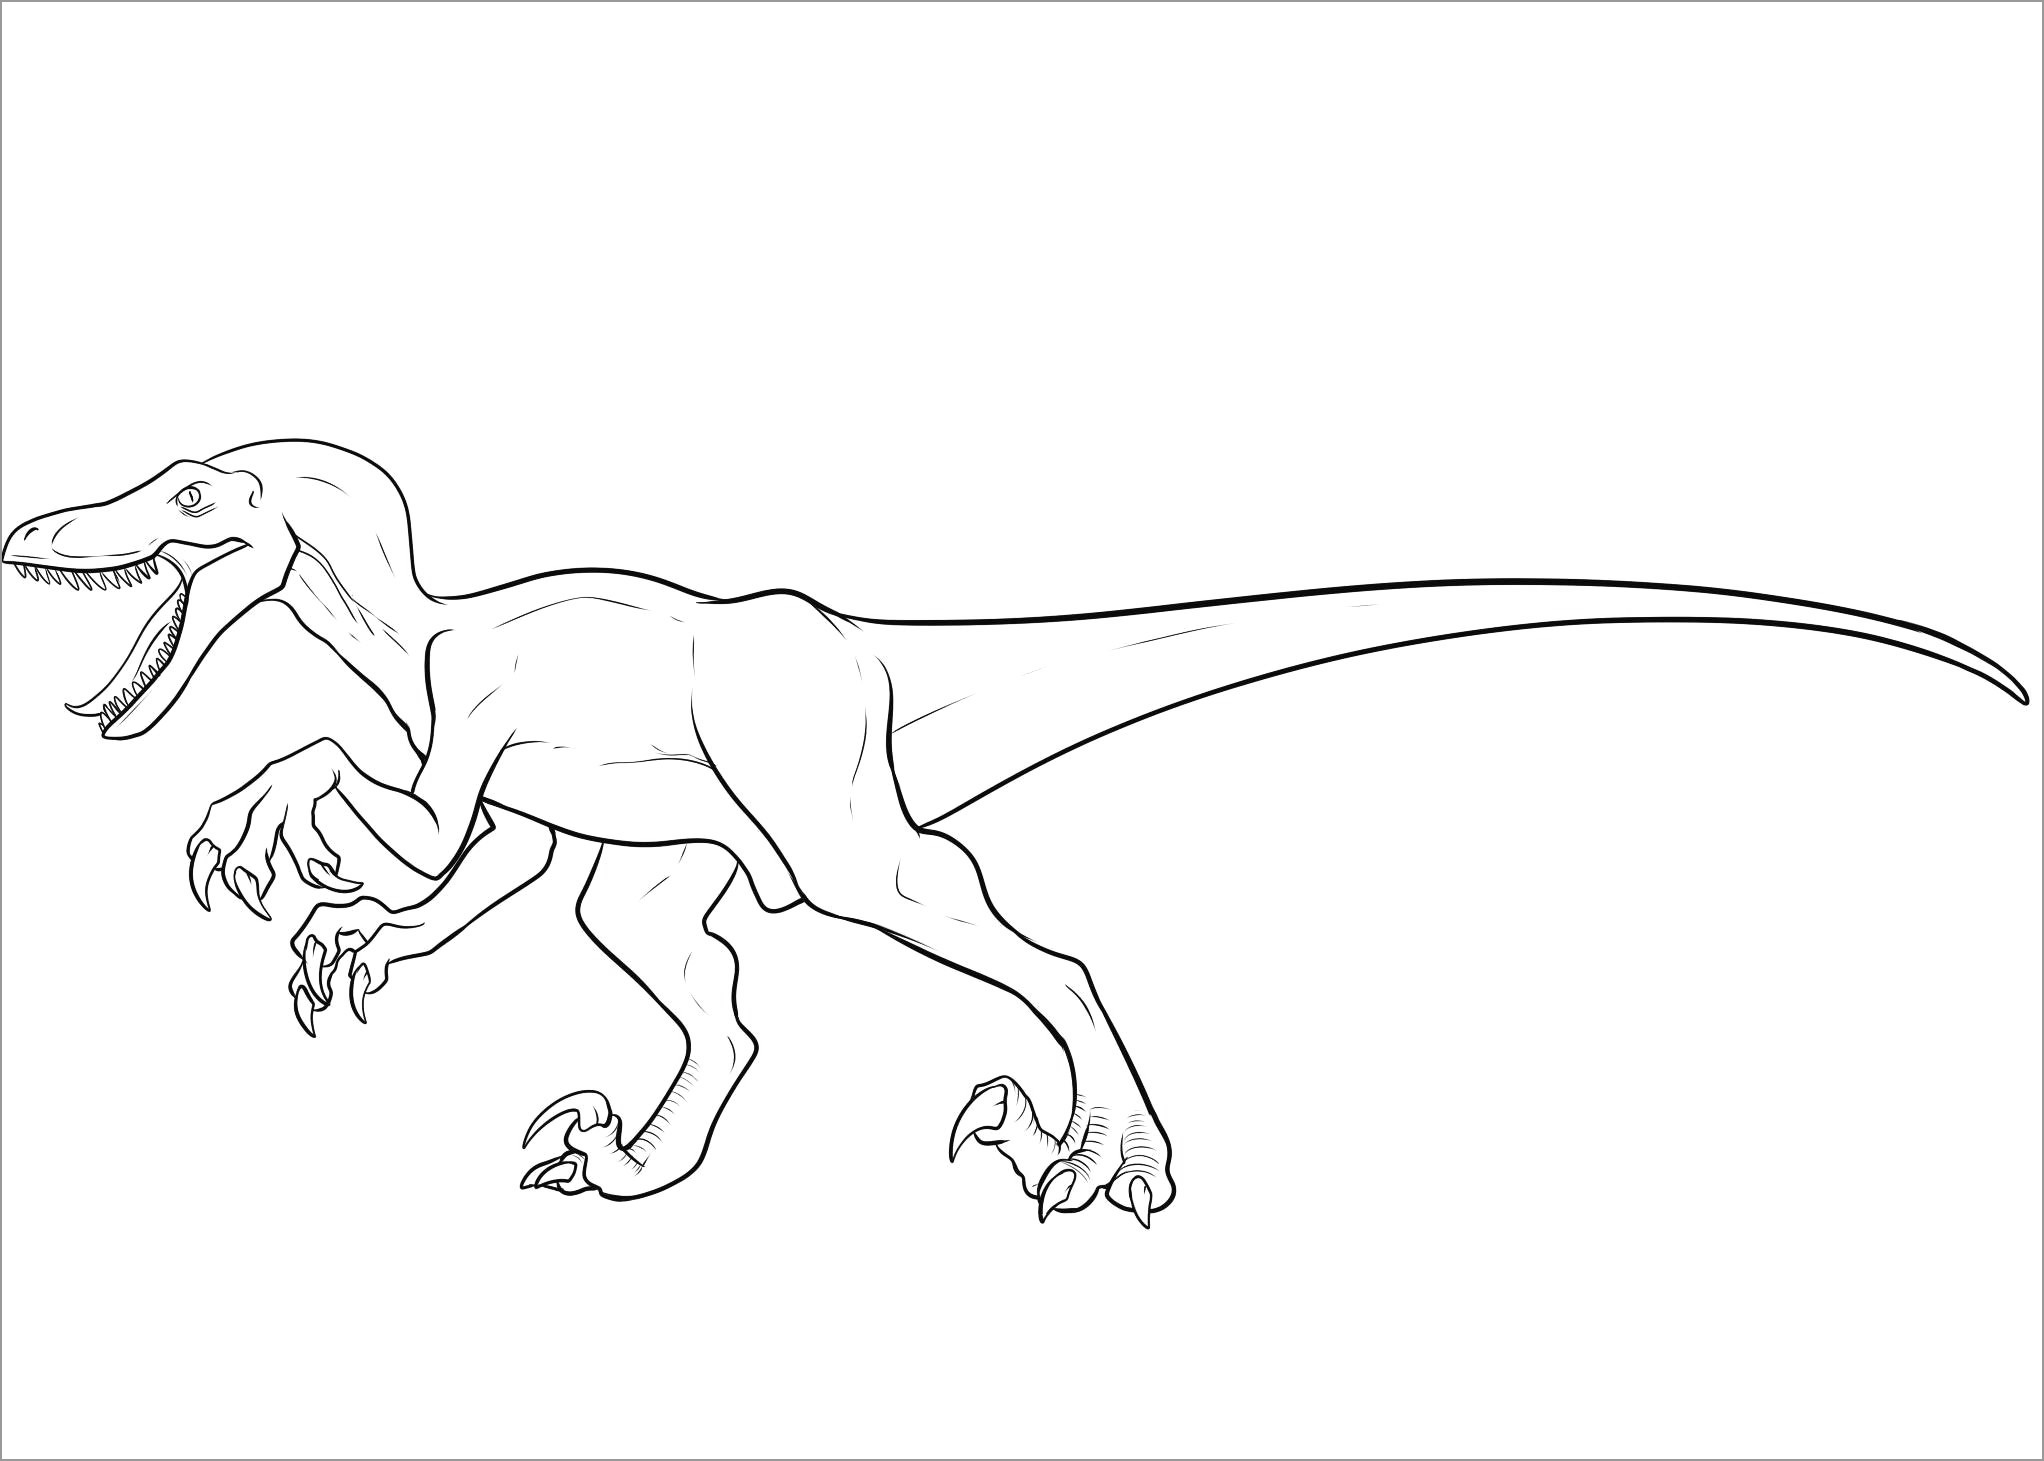 Jurassic Park Velociraptor Coloring Pages   ColoringBay